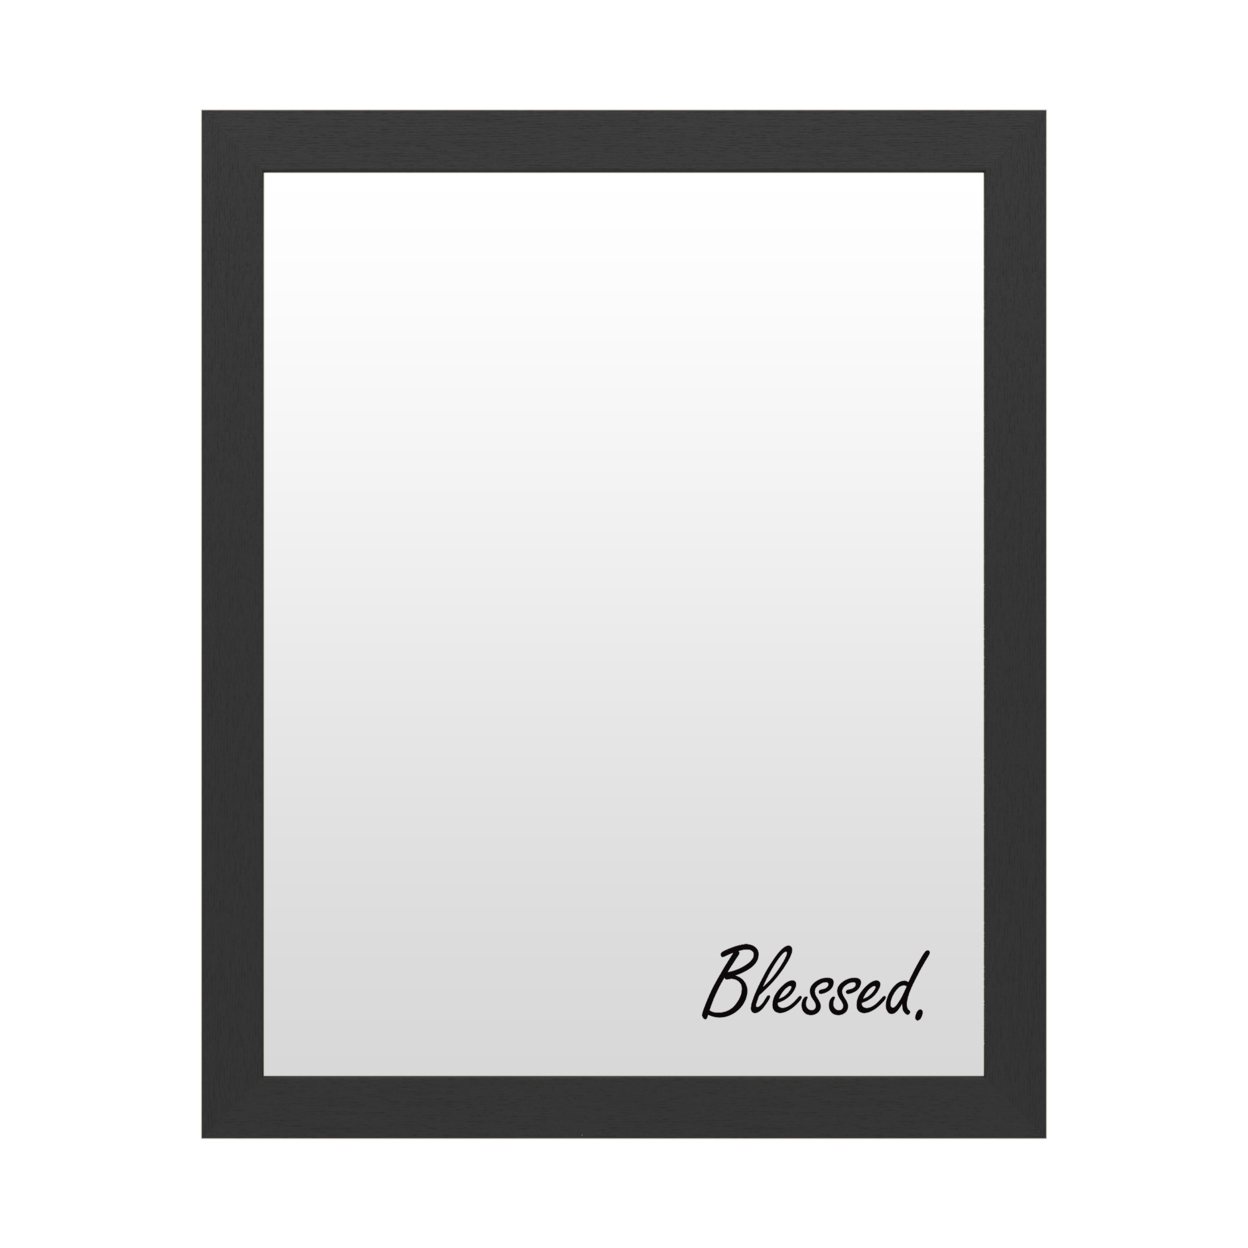 Dry Erase 16 X 20 Marker Board With Printed Artwork - Blessed Script White Board - Ready To Hang